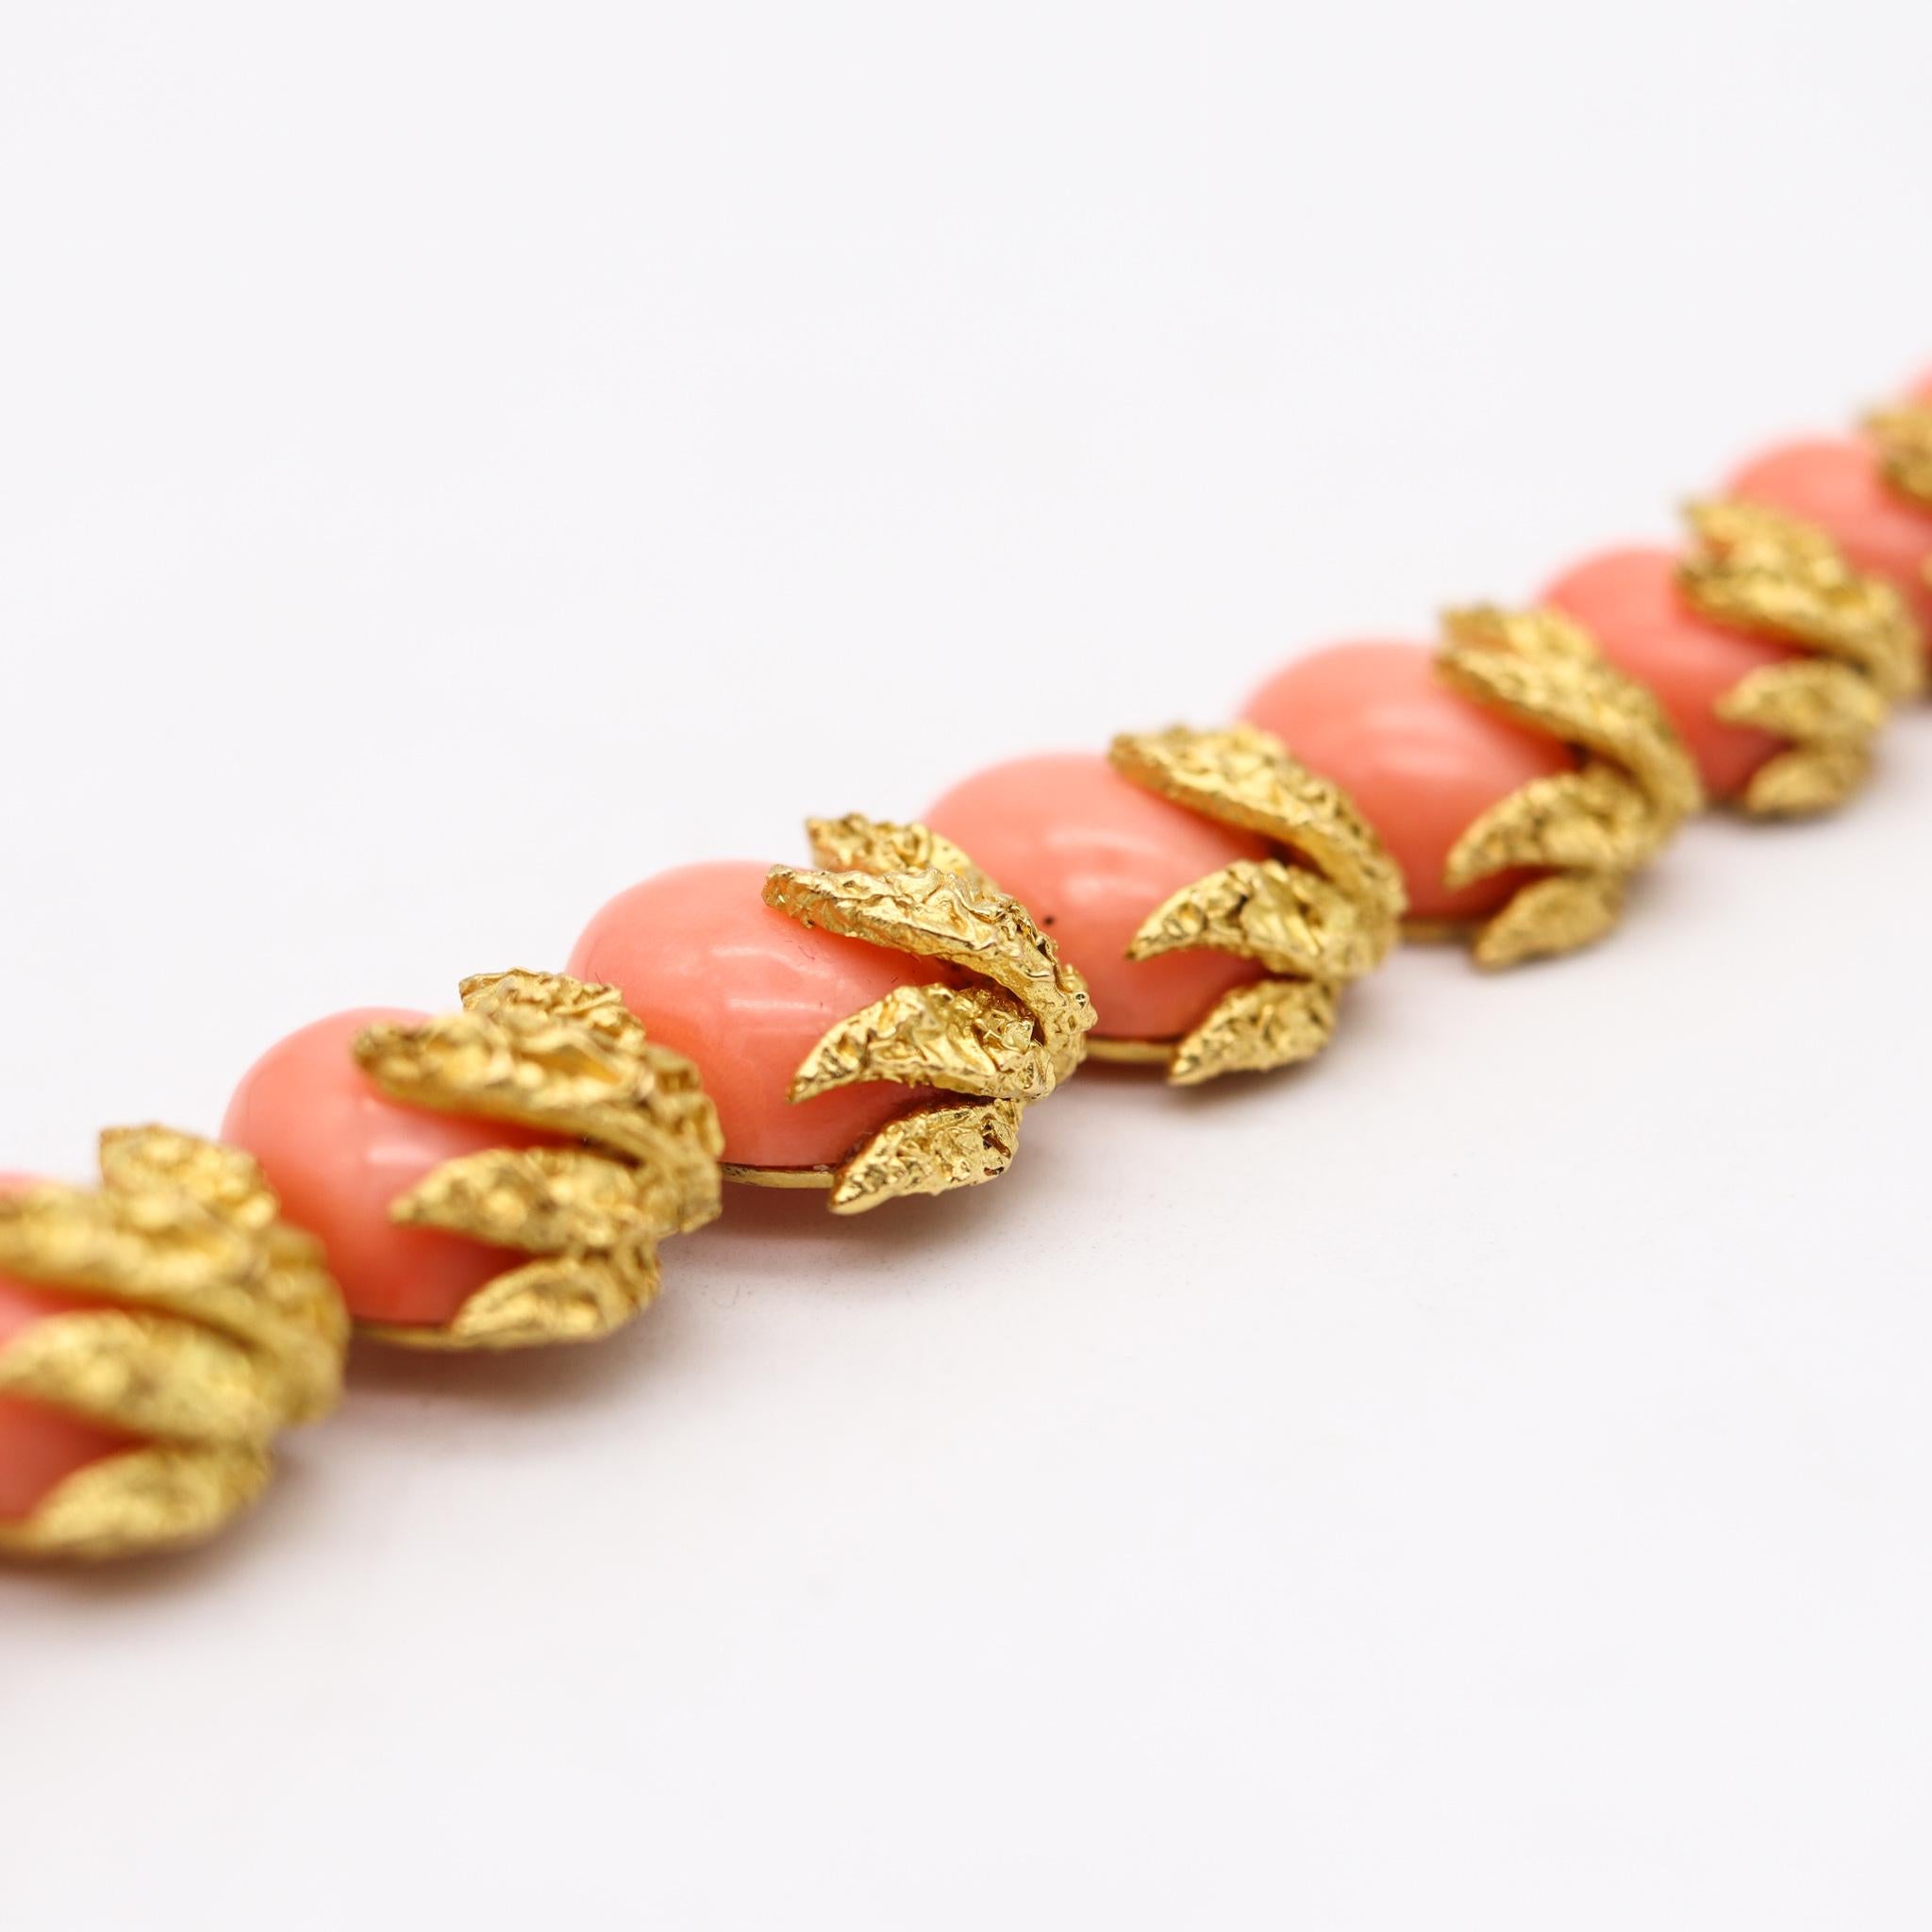 Cabochon Fred of Paris 1970 Bracelet in Textured 18kt Yellow Gold with Graduated Corals For Sale